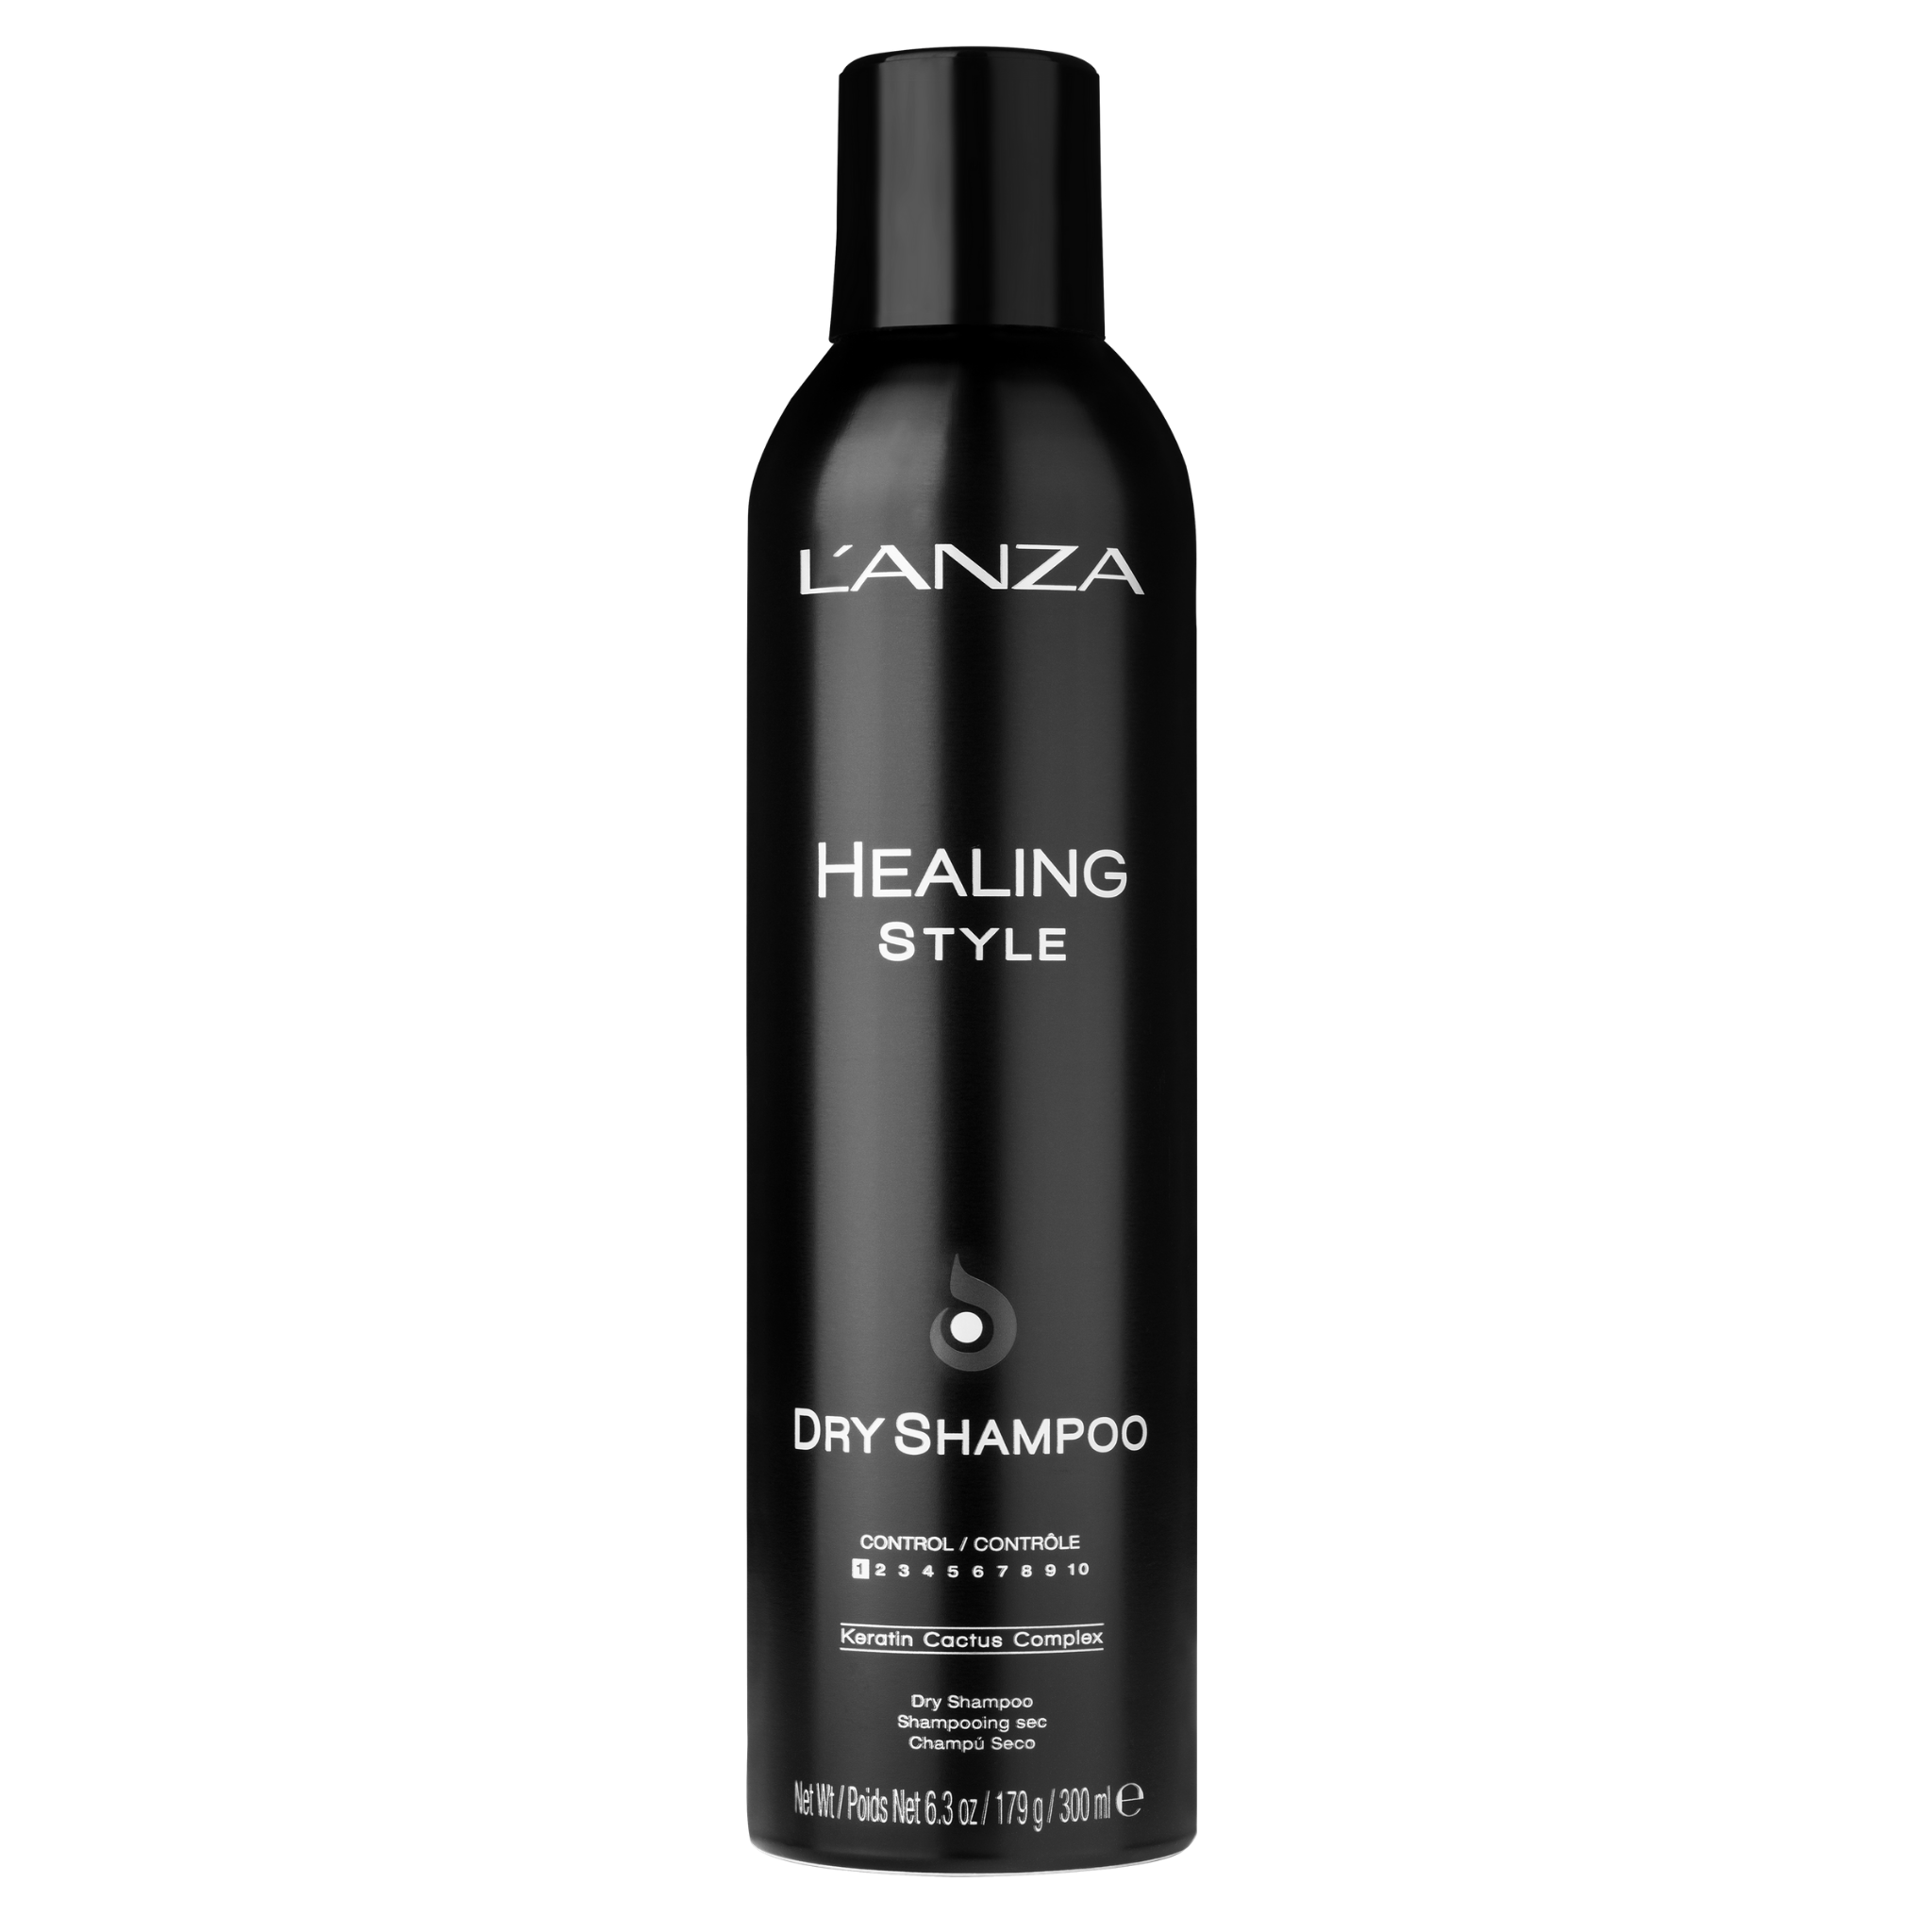 L’Anza. Healing Style Shampoing Sec - 300ml - Concept C. Shop